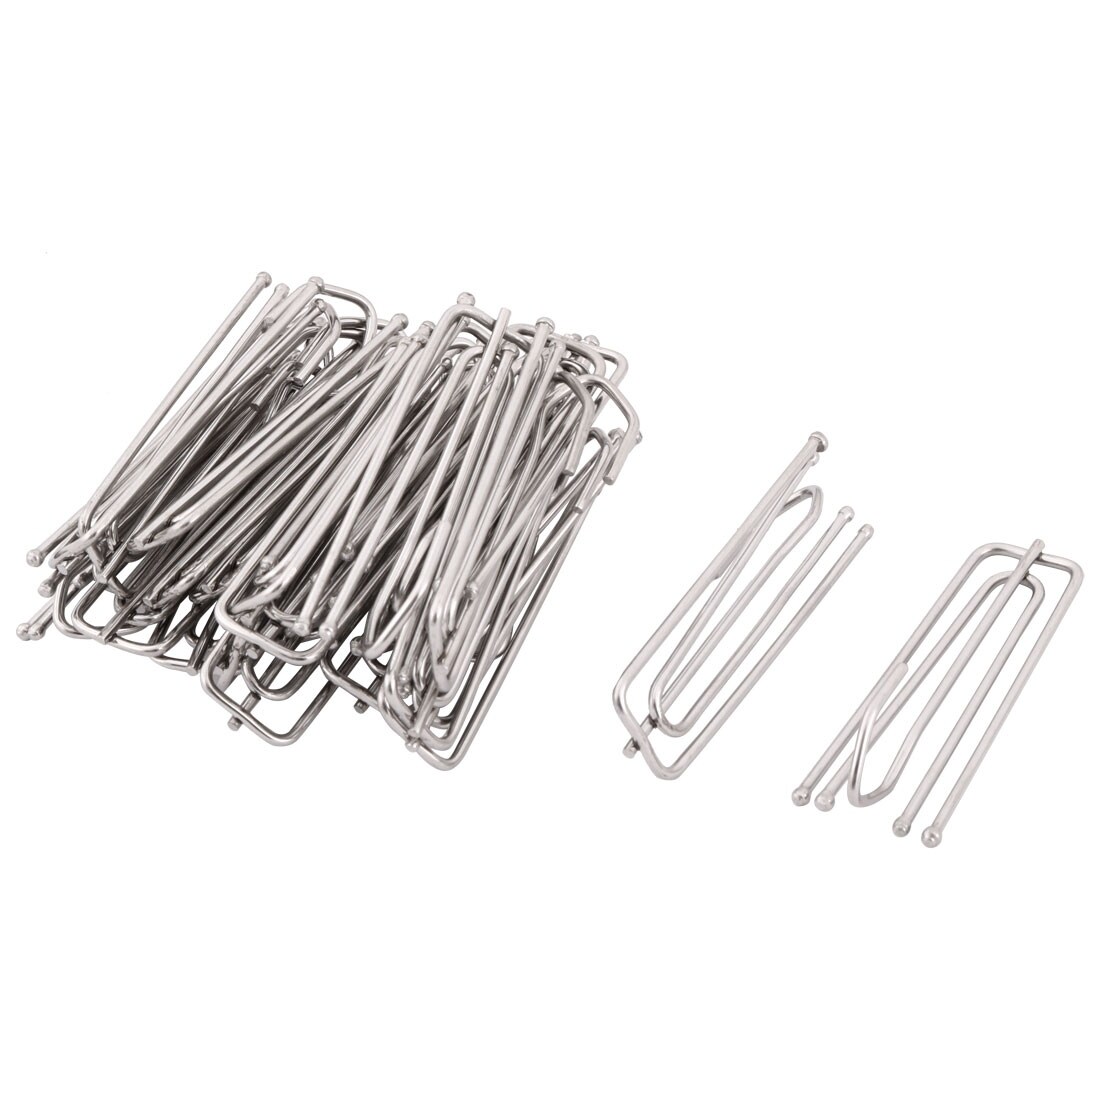 Unique Bargains Multi-Purpose Stainless Steel Pegs Hanging Hole Clothes Pins Clips Hanger 20pcs - Silver Tone